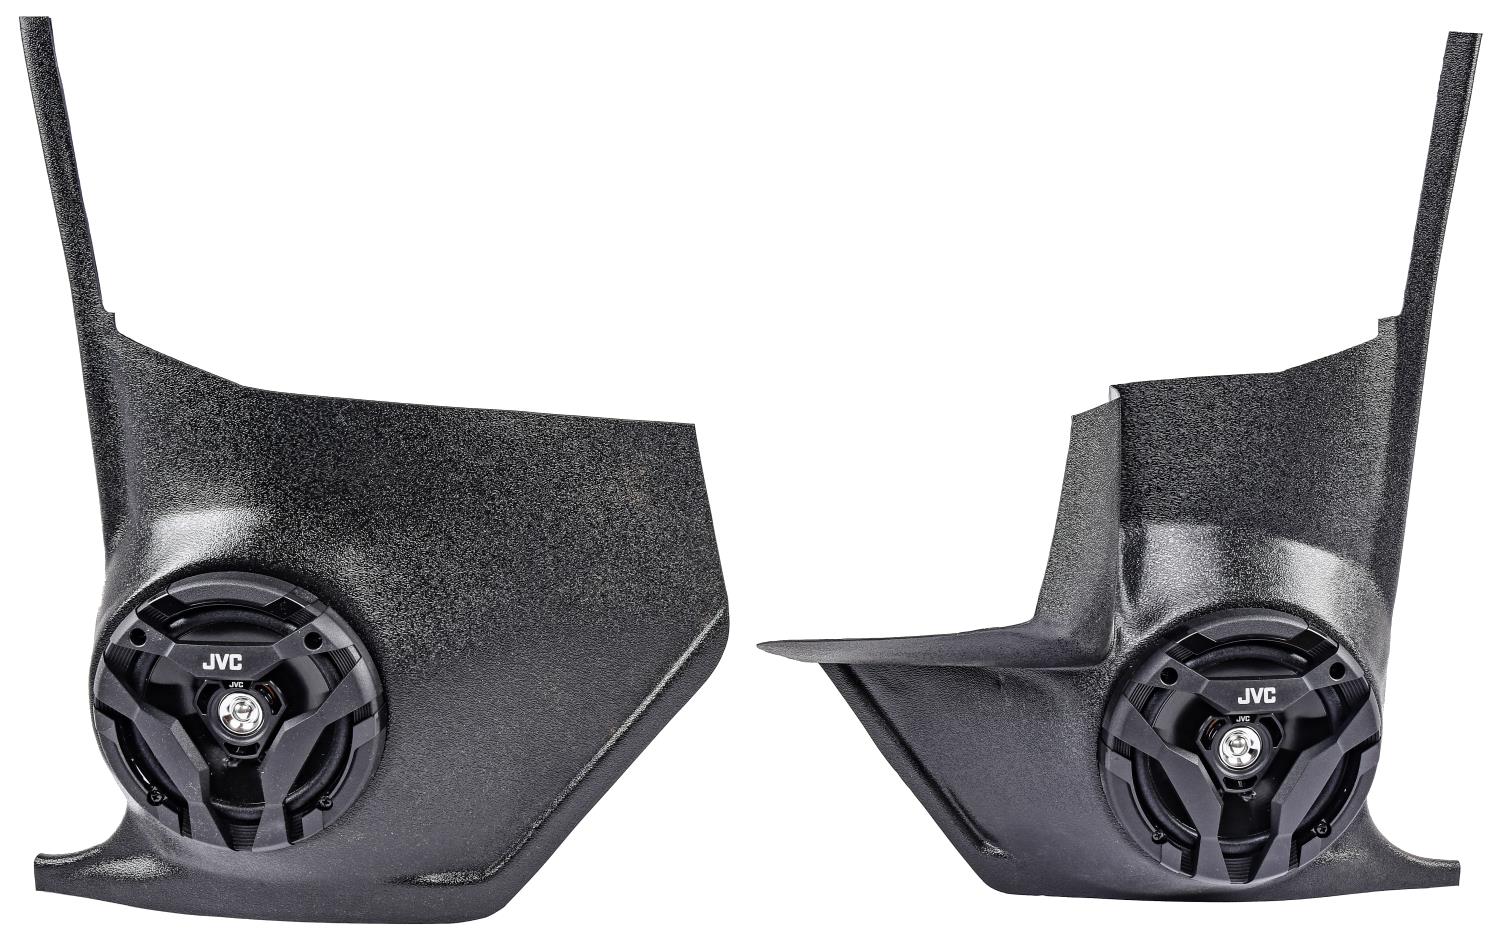 Interior Kick Panels for 1964-1967 Chevrolet, Buick, Oldsmobile, Pontiac Models With A/C [JVC Speakers]